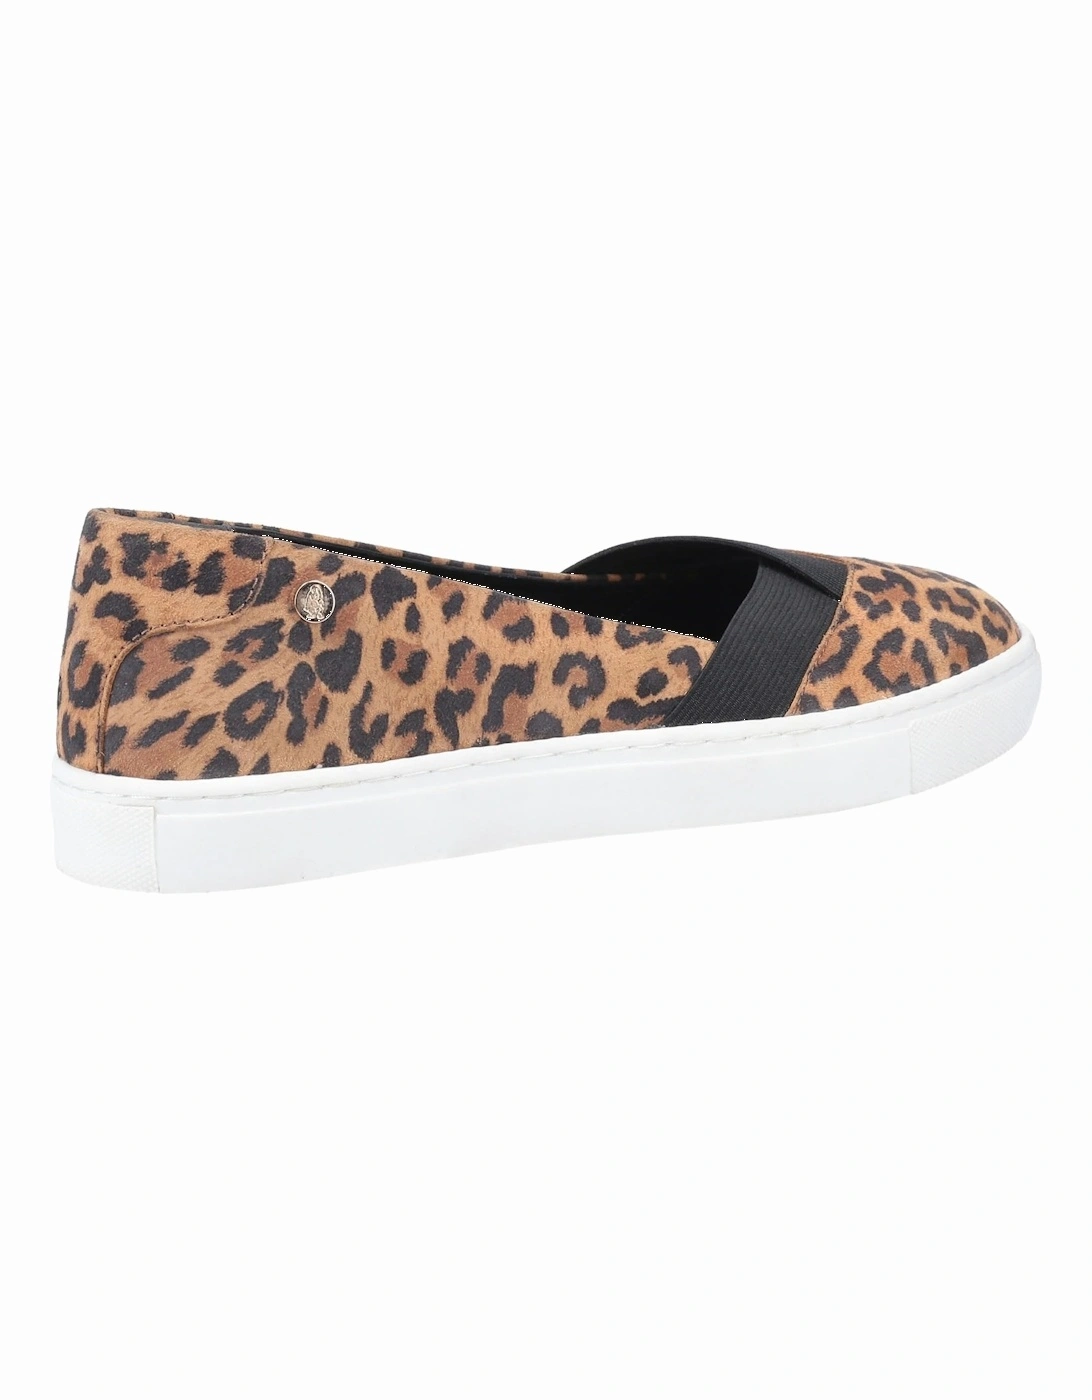 Womens/Ladies Tiffany Leopard Print Suede Shoes